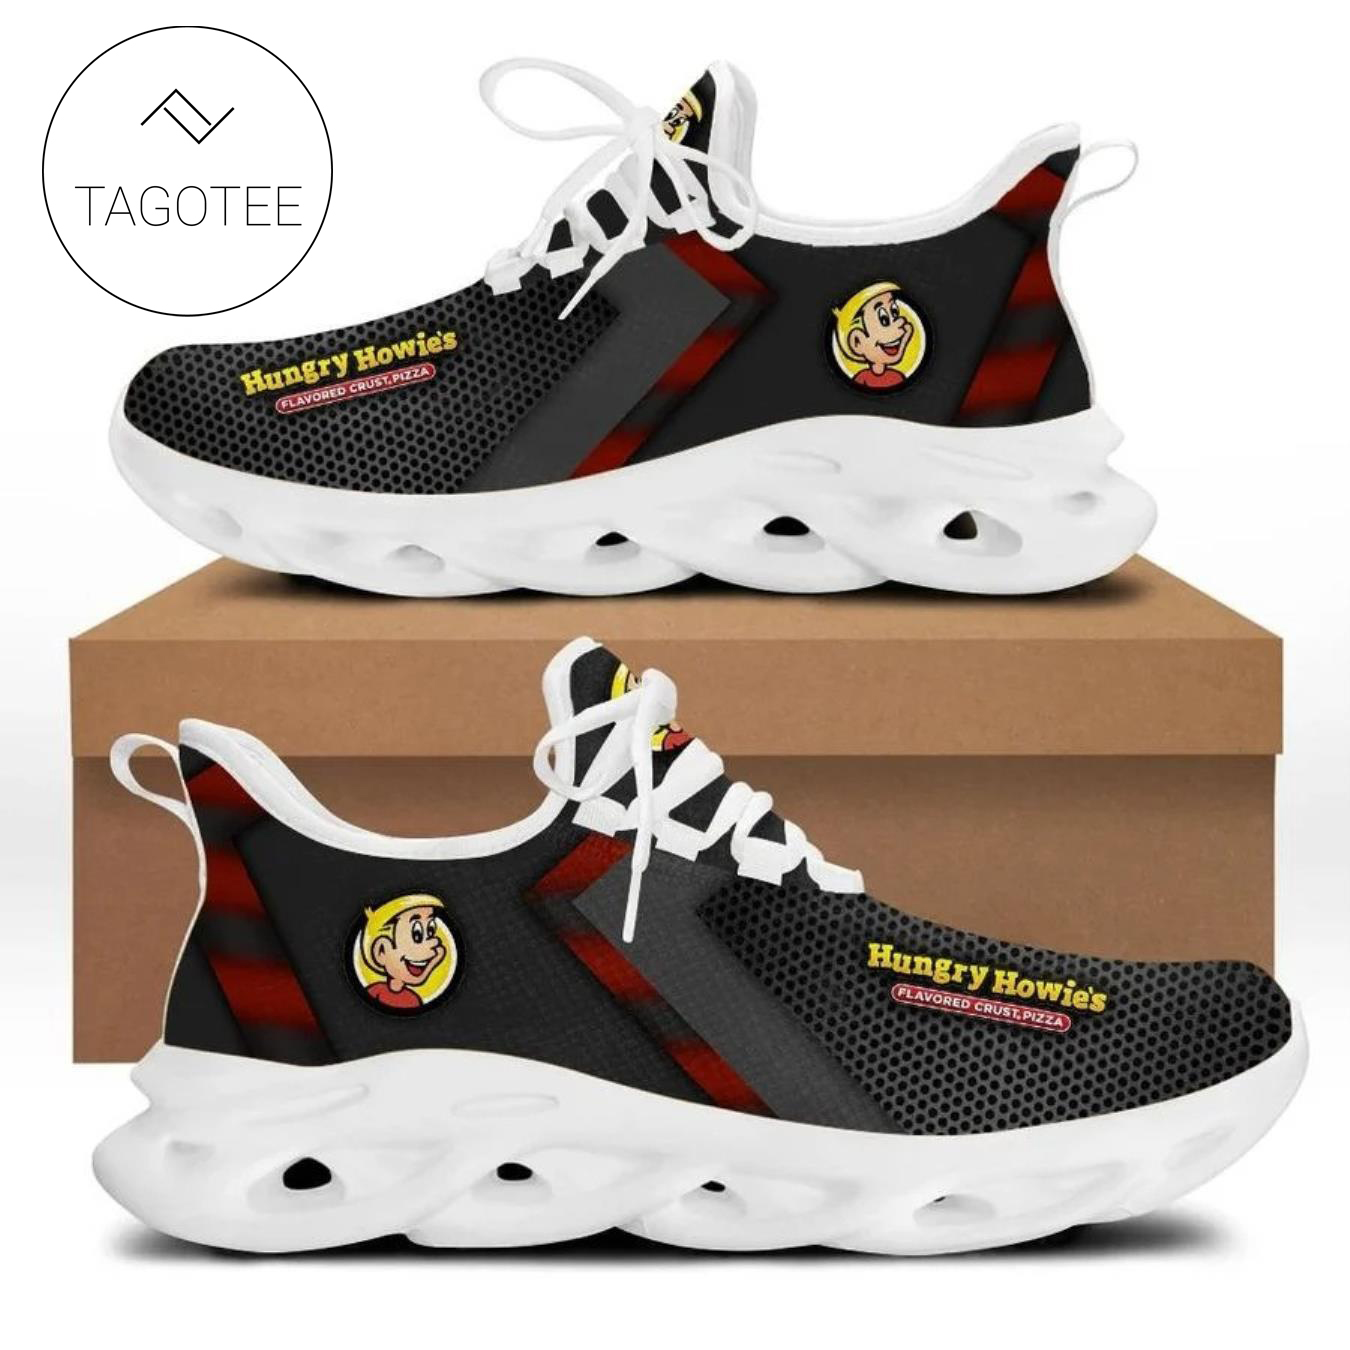 Hungry Howie's Pizza Max Soul Shoes - Tagotee